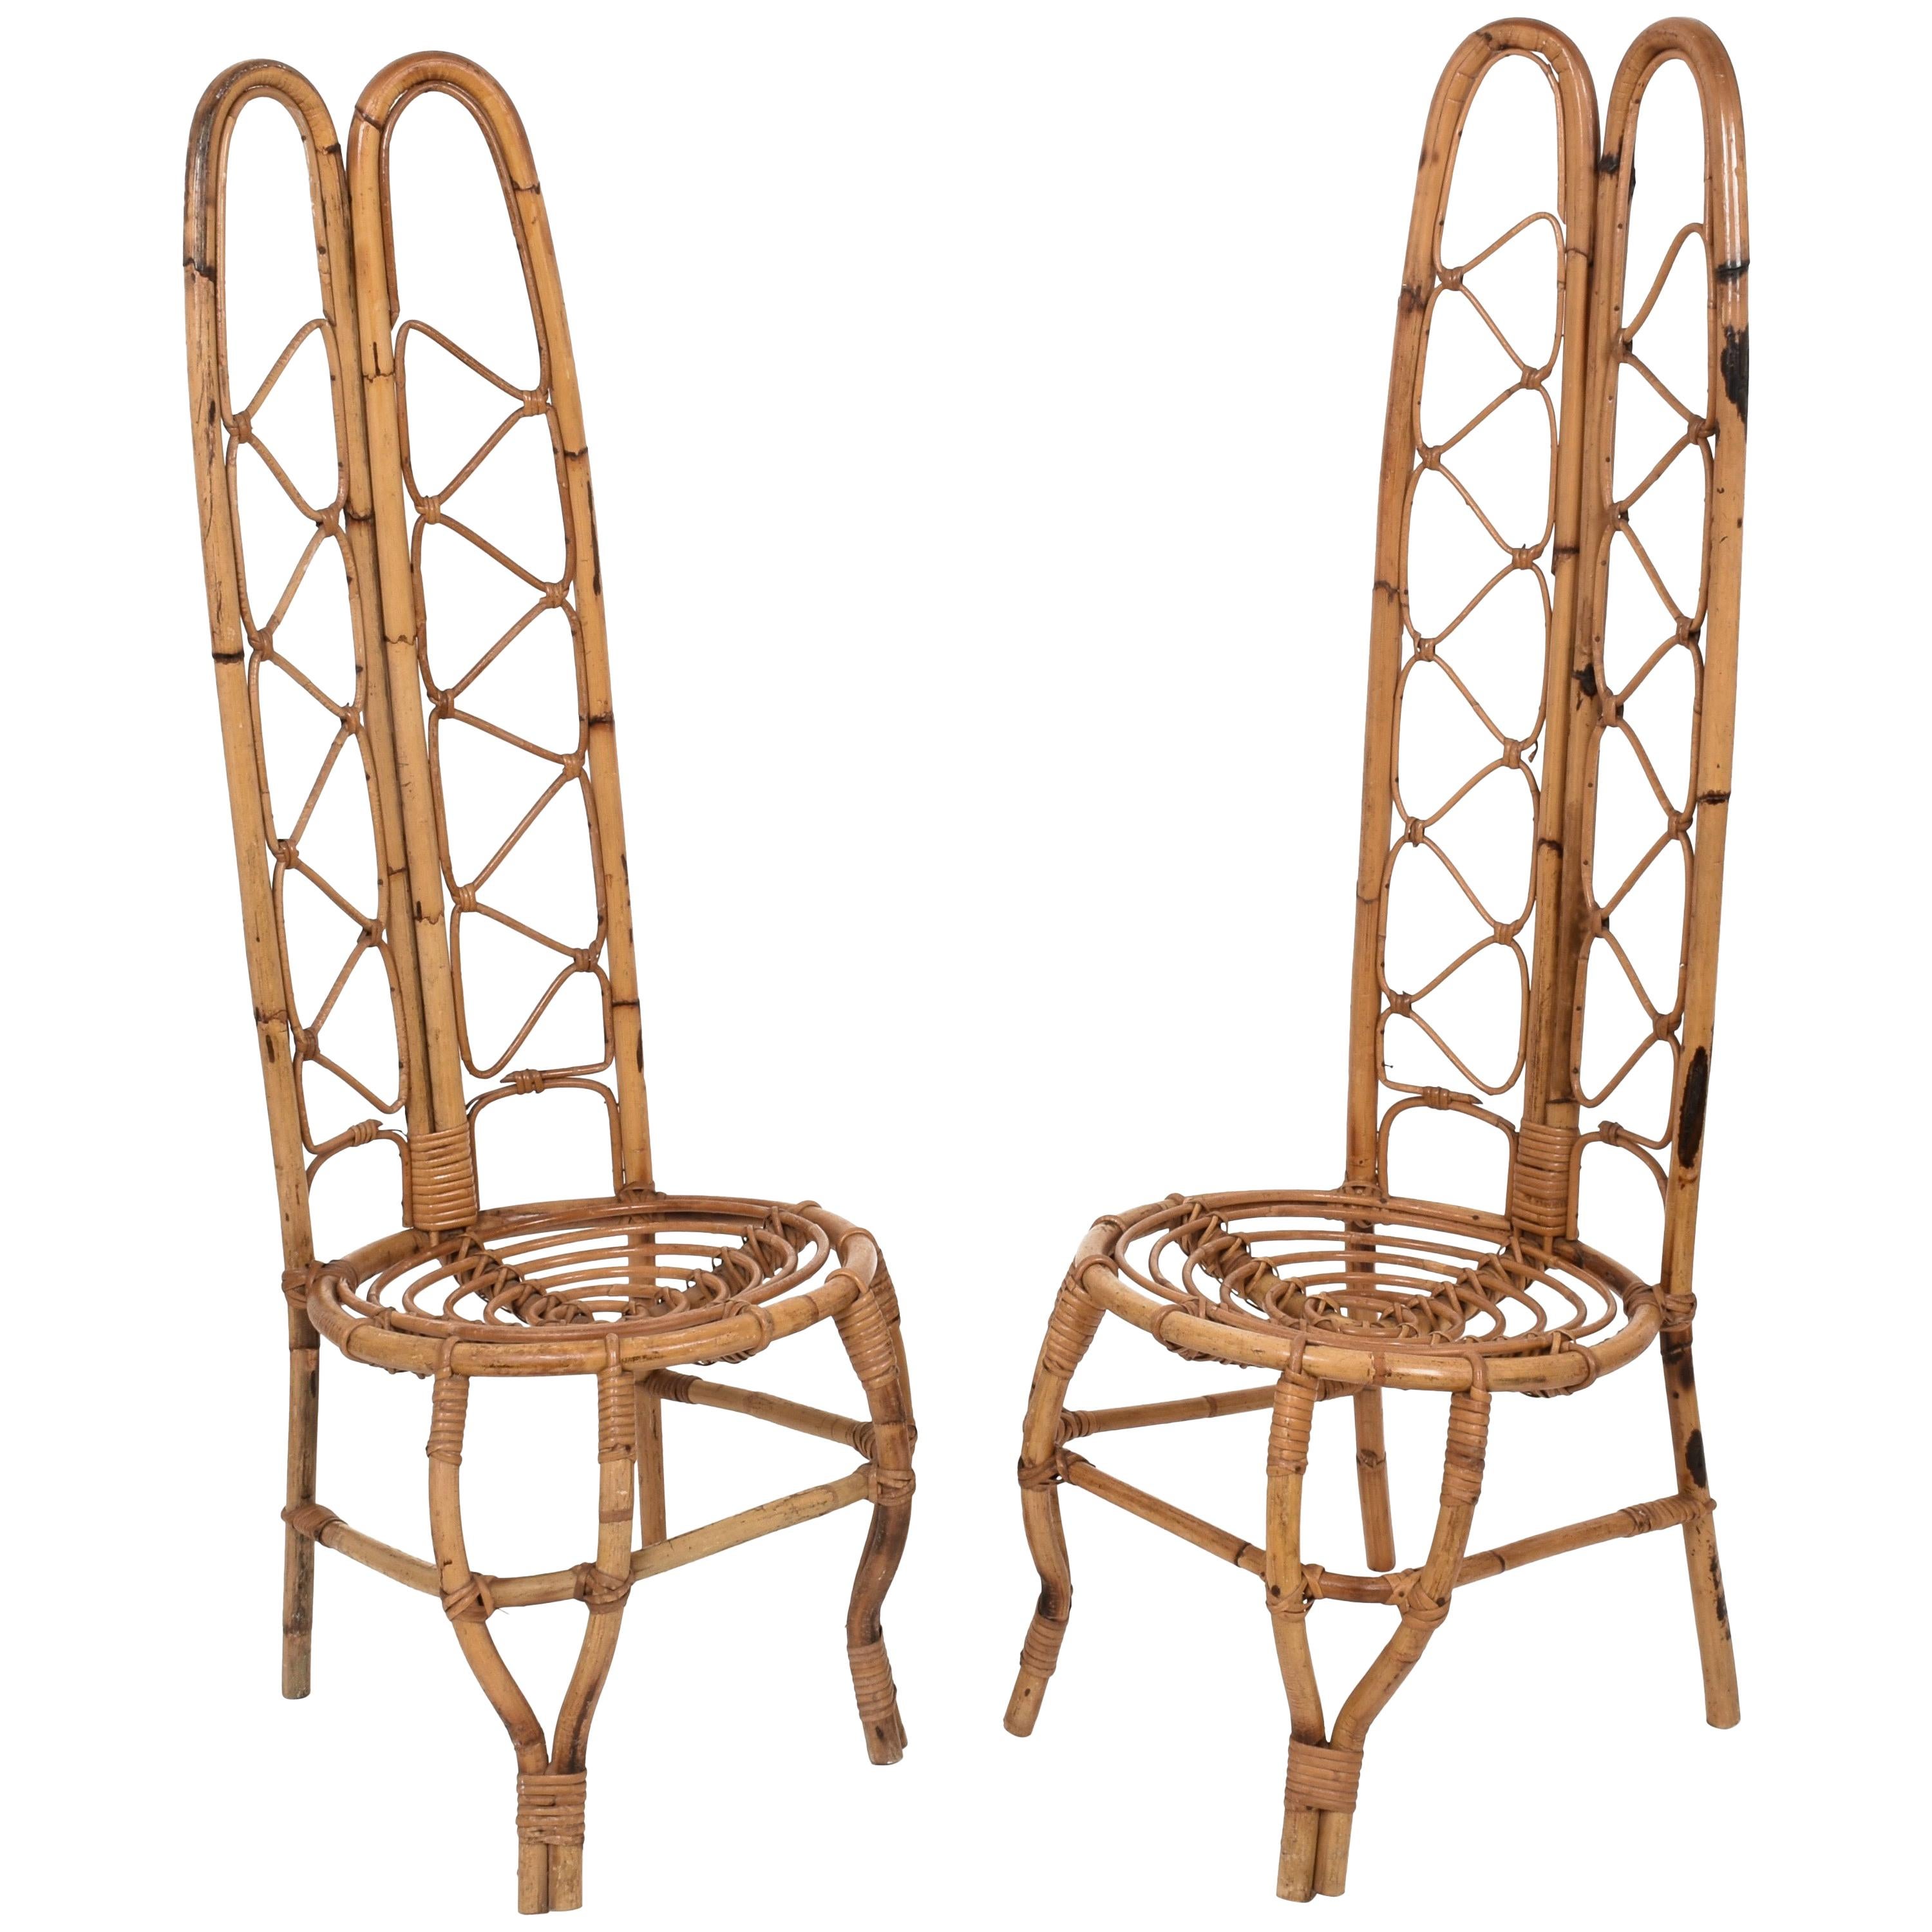 Set of Two, Rattan and Bamboo Chairs on the French Riviera, France of the 1960s